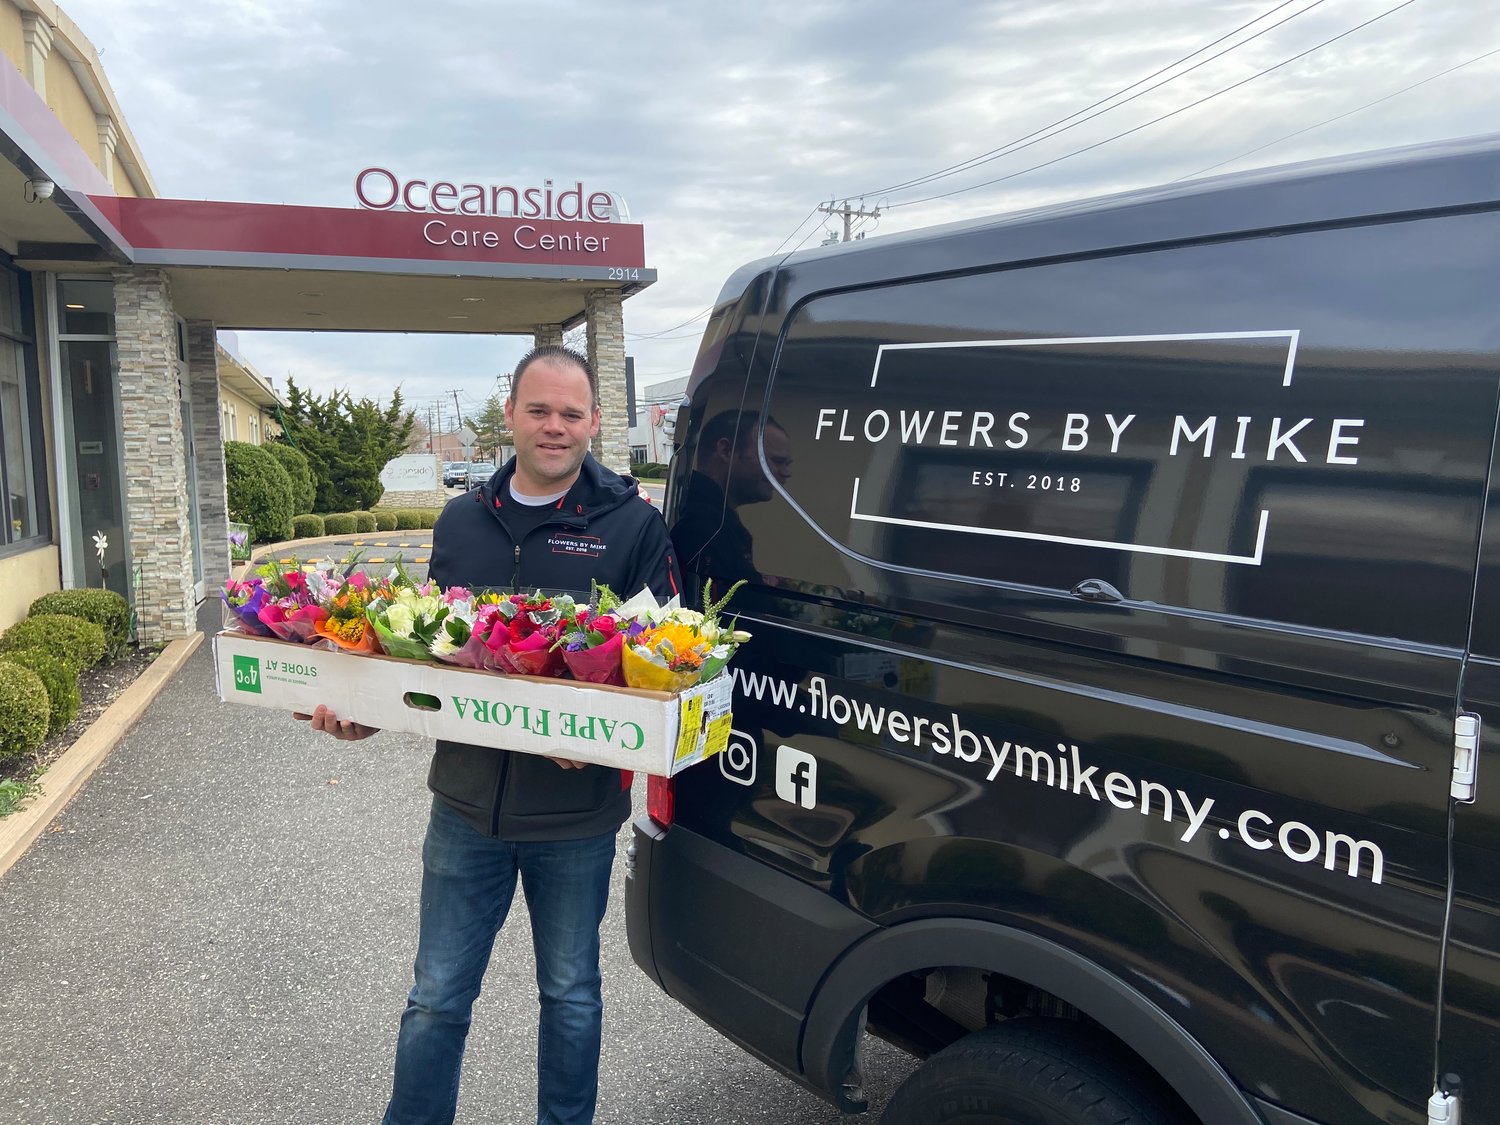 Flowers by Mike owner Mike Graham donated arrangements throughout the neighborhood, including at the Oceanside Care Center, after having to shutdown his businesses as of March 22 because of the coronavirus